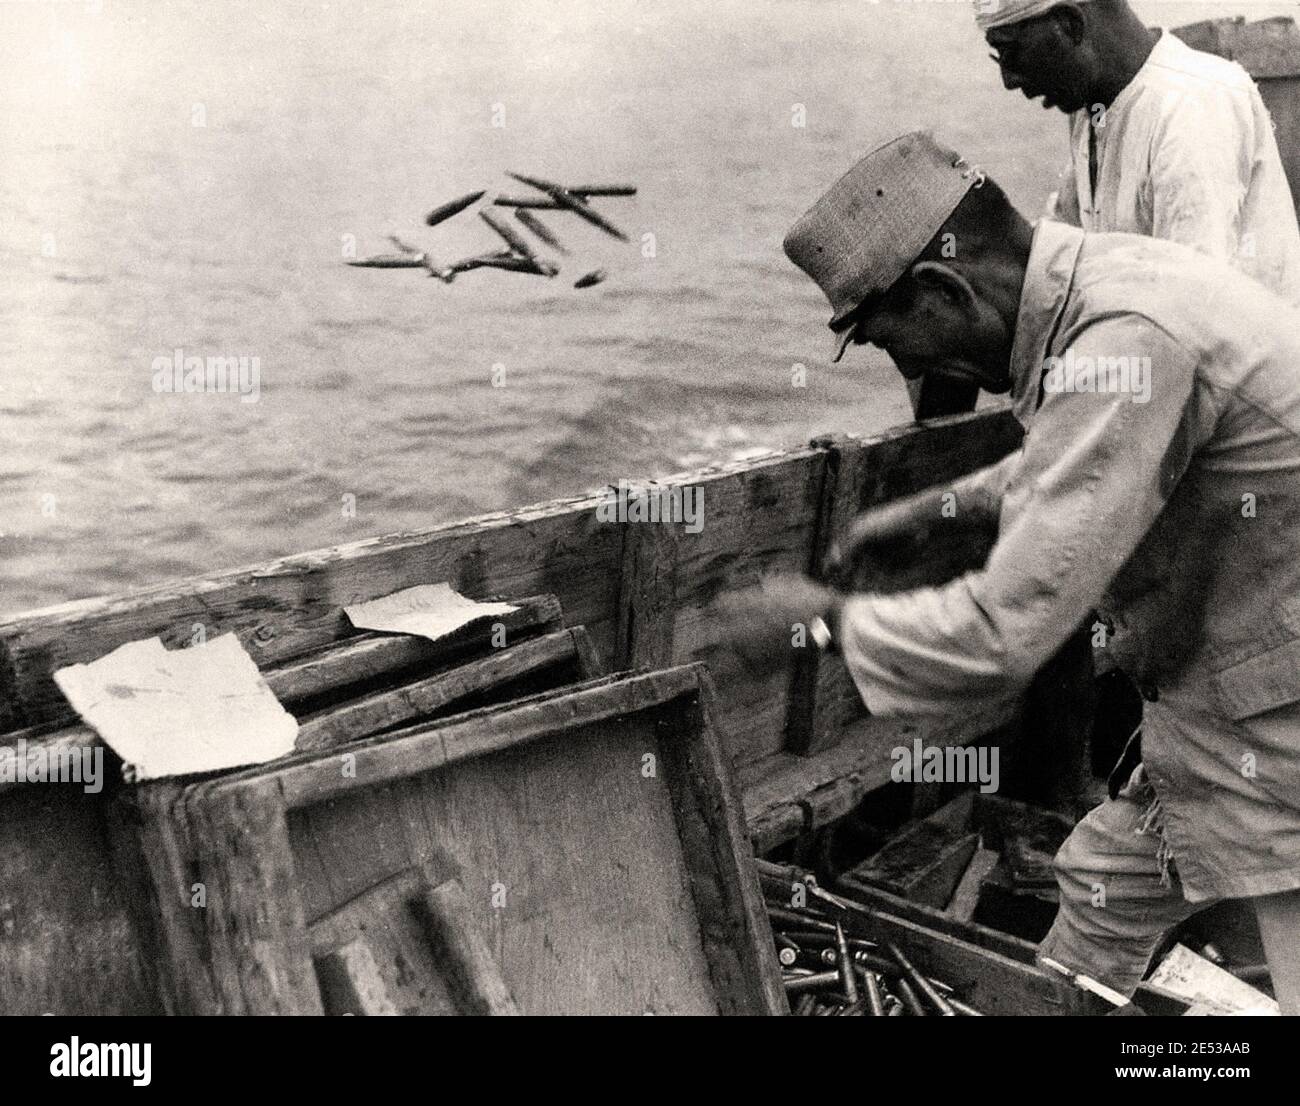 Japanese ammunition being dumped into the sea on September 21, 1945. During the U.S. occupation, almost all of the Japanese war industry and existing Stock Photo